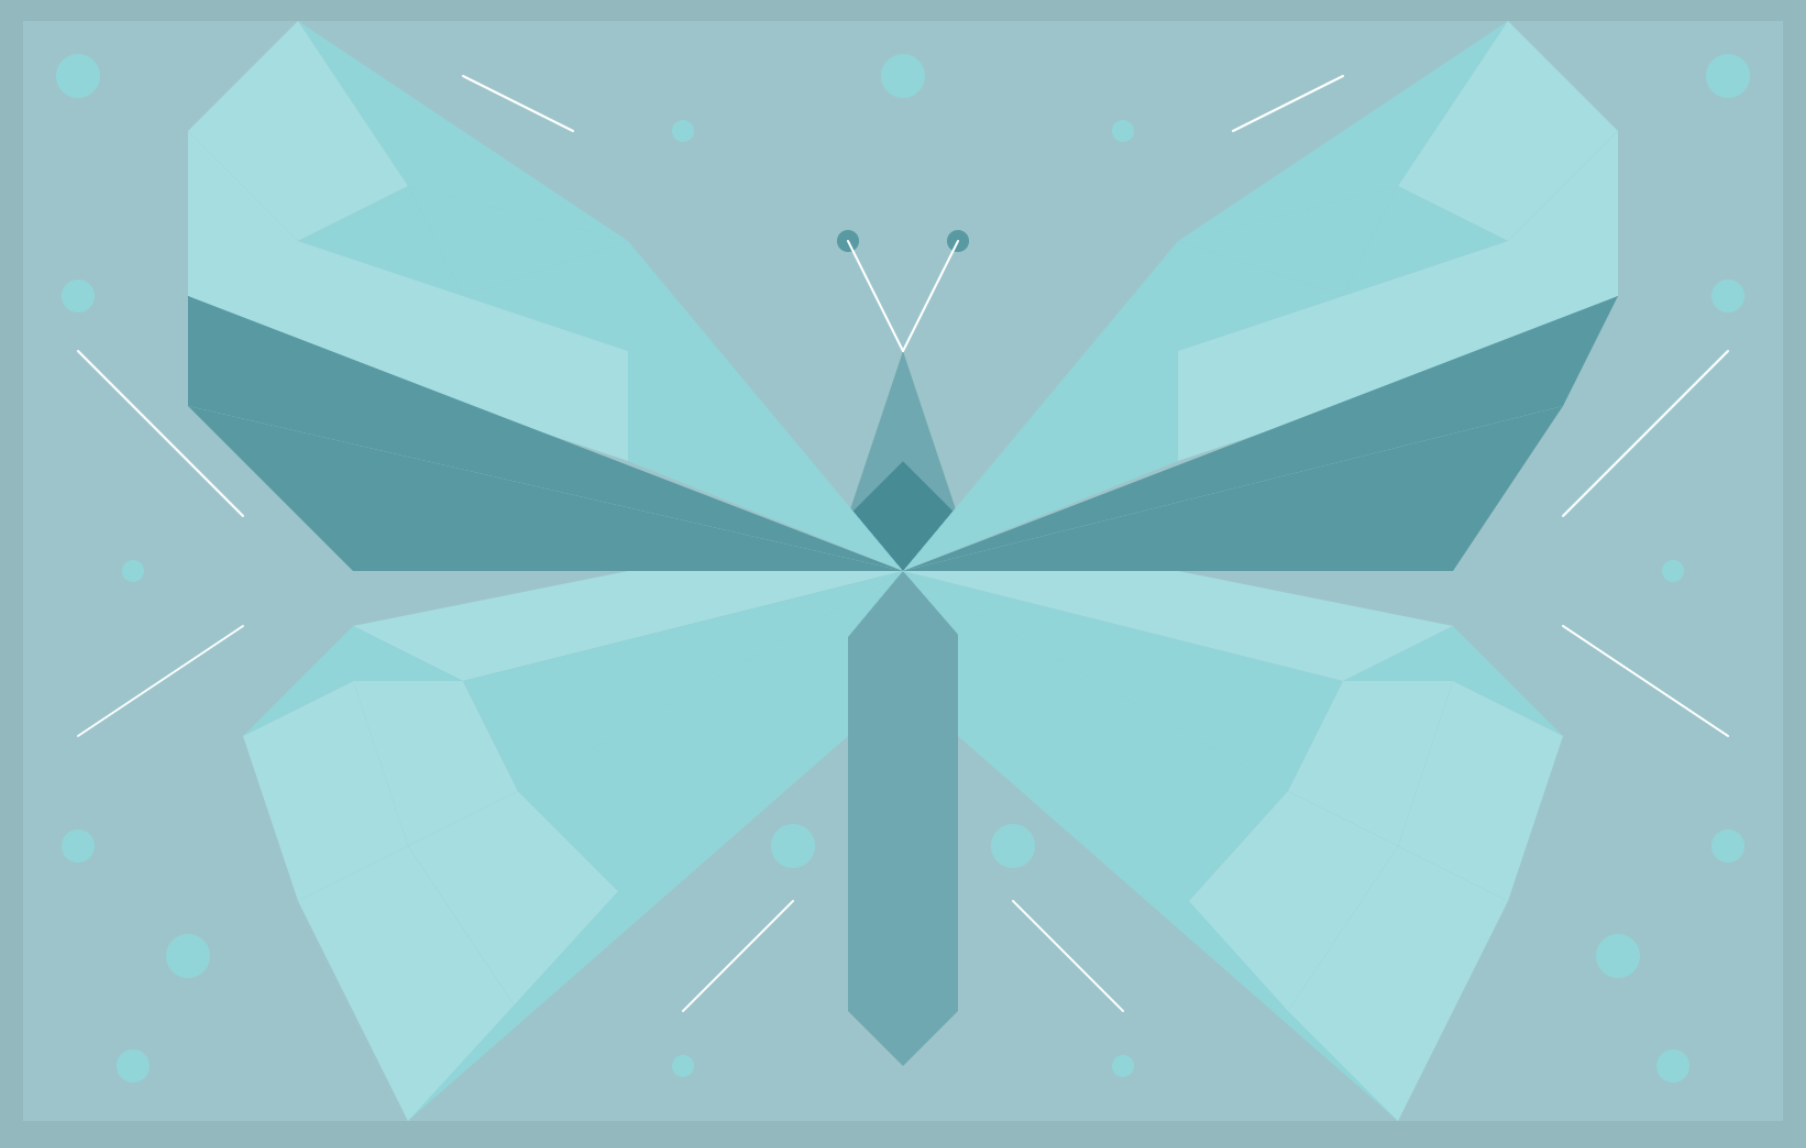 Butterfly made of teal and light blue shapes on a dotted and lined light blue background.